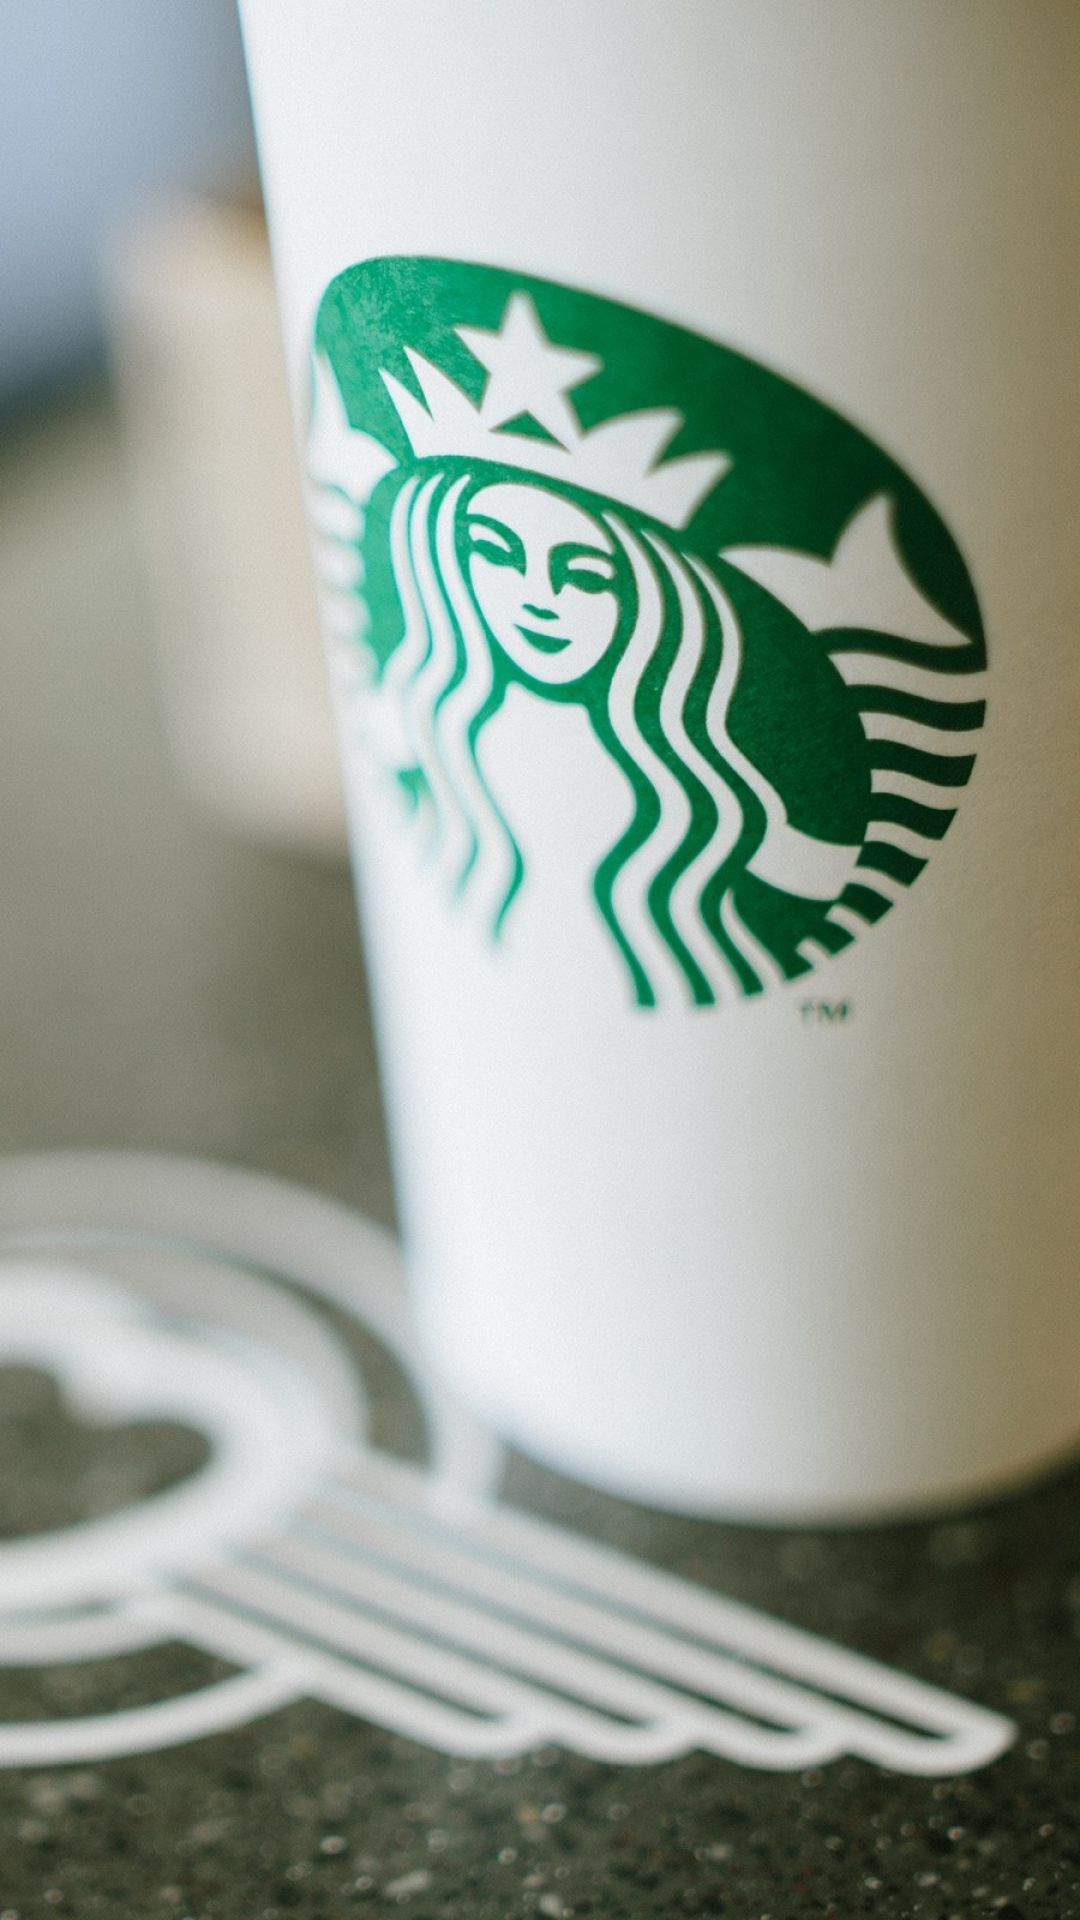 Starbucks Coffee Cup Tilt Shift Android Wallpaper free download